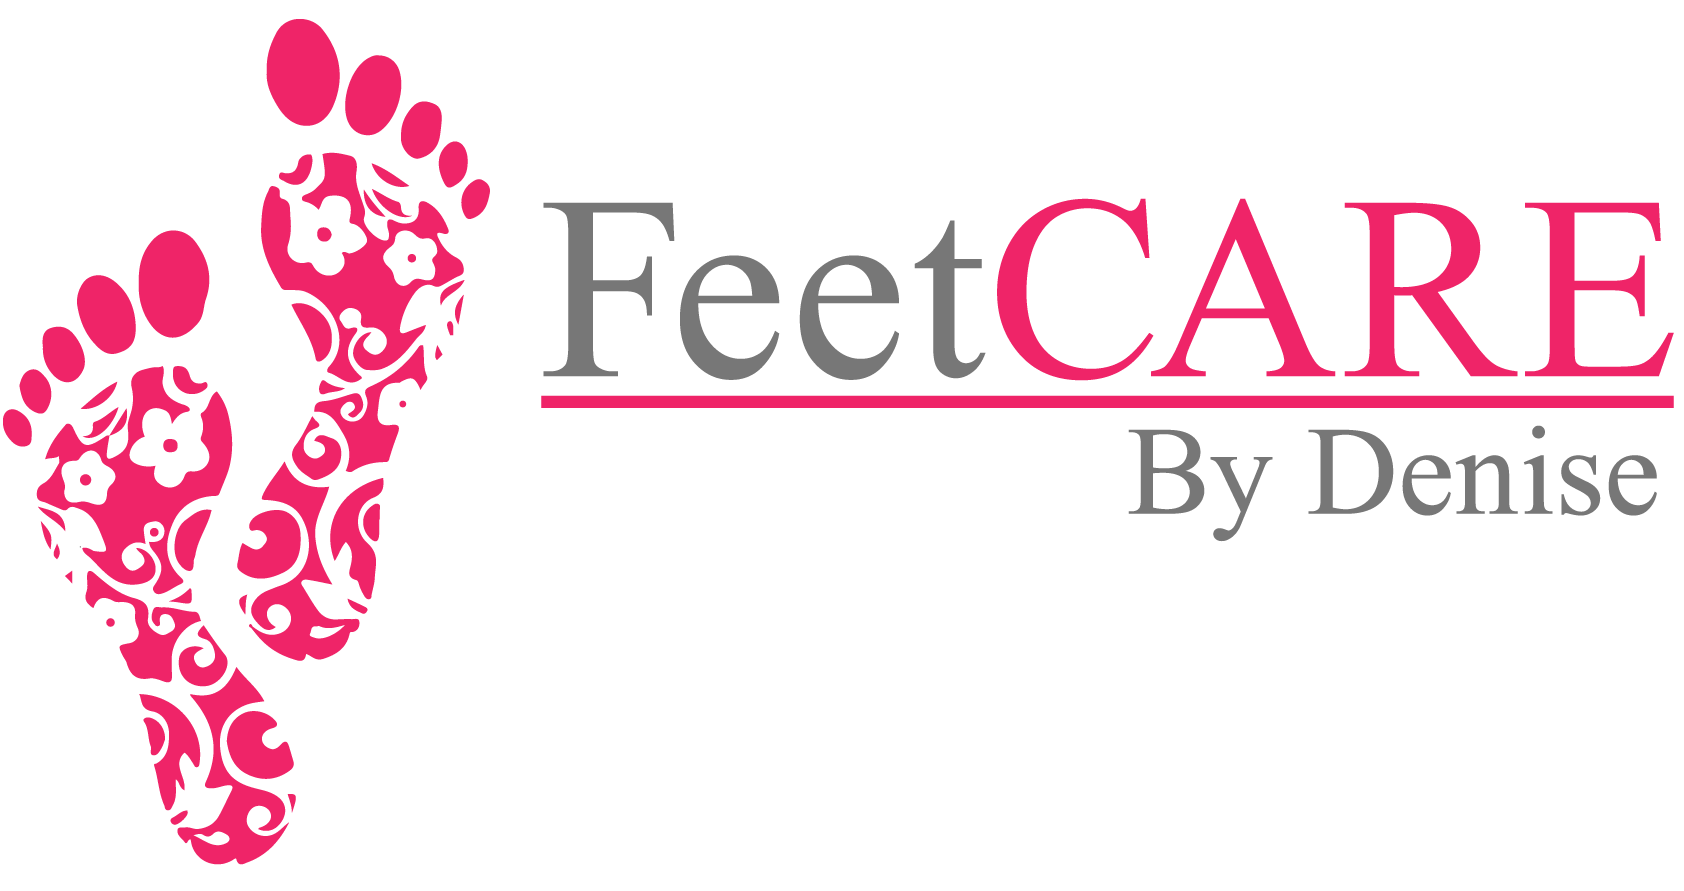 Feetcare by Denise logo